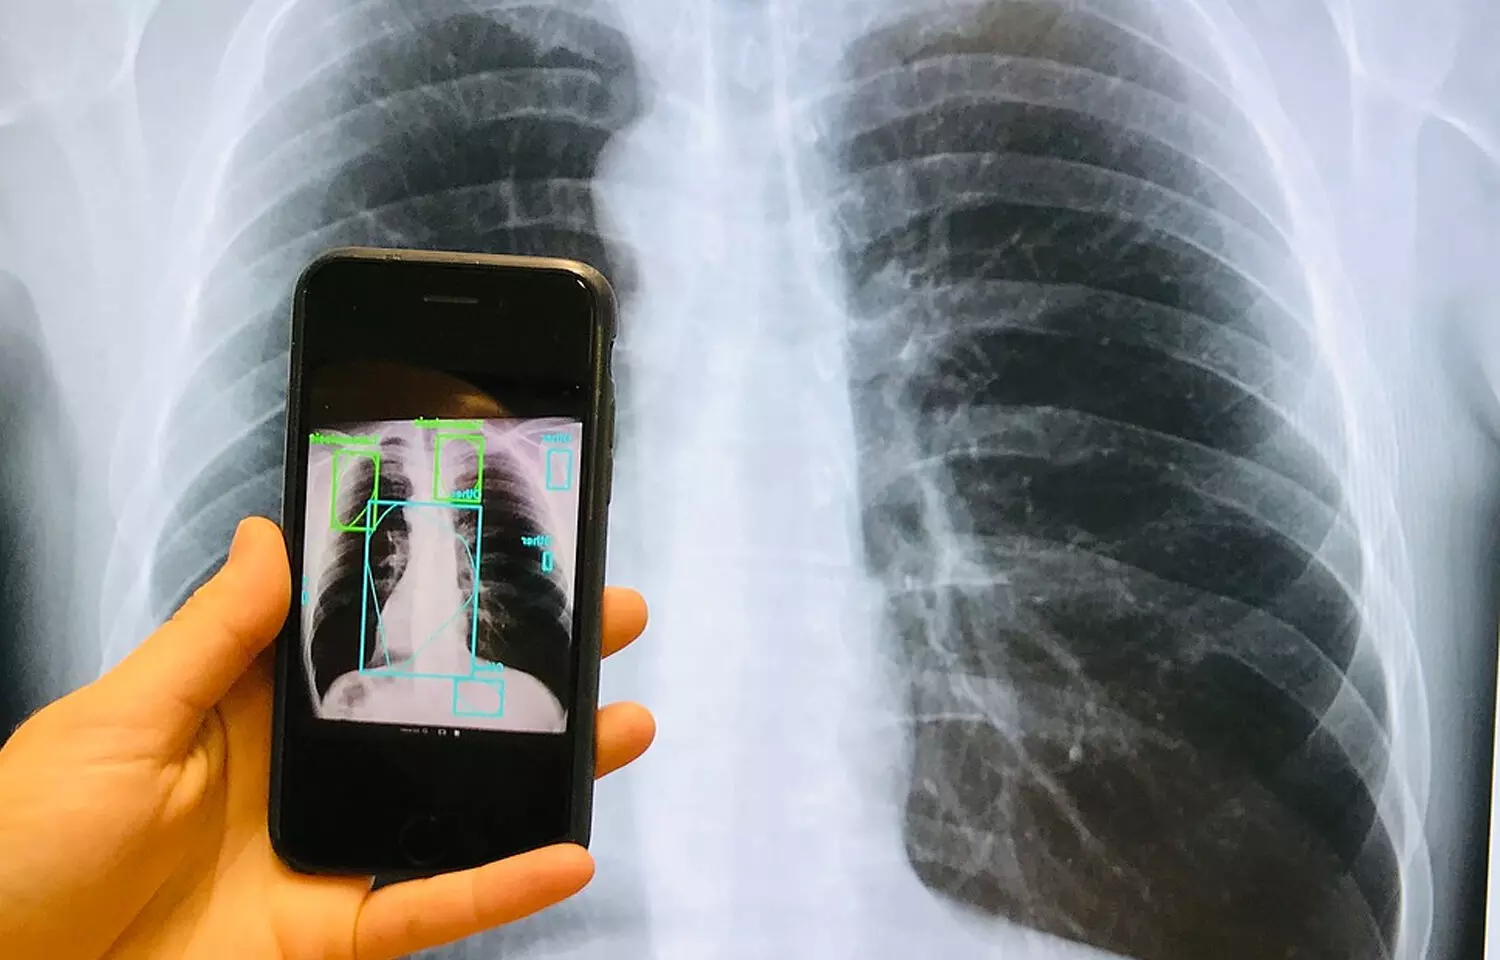 TB can be detected on smartphone using new model: Study